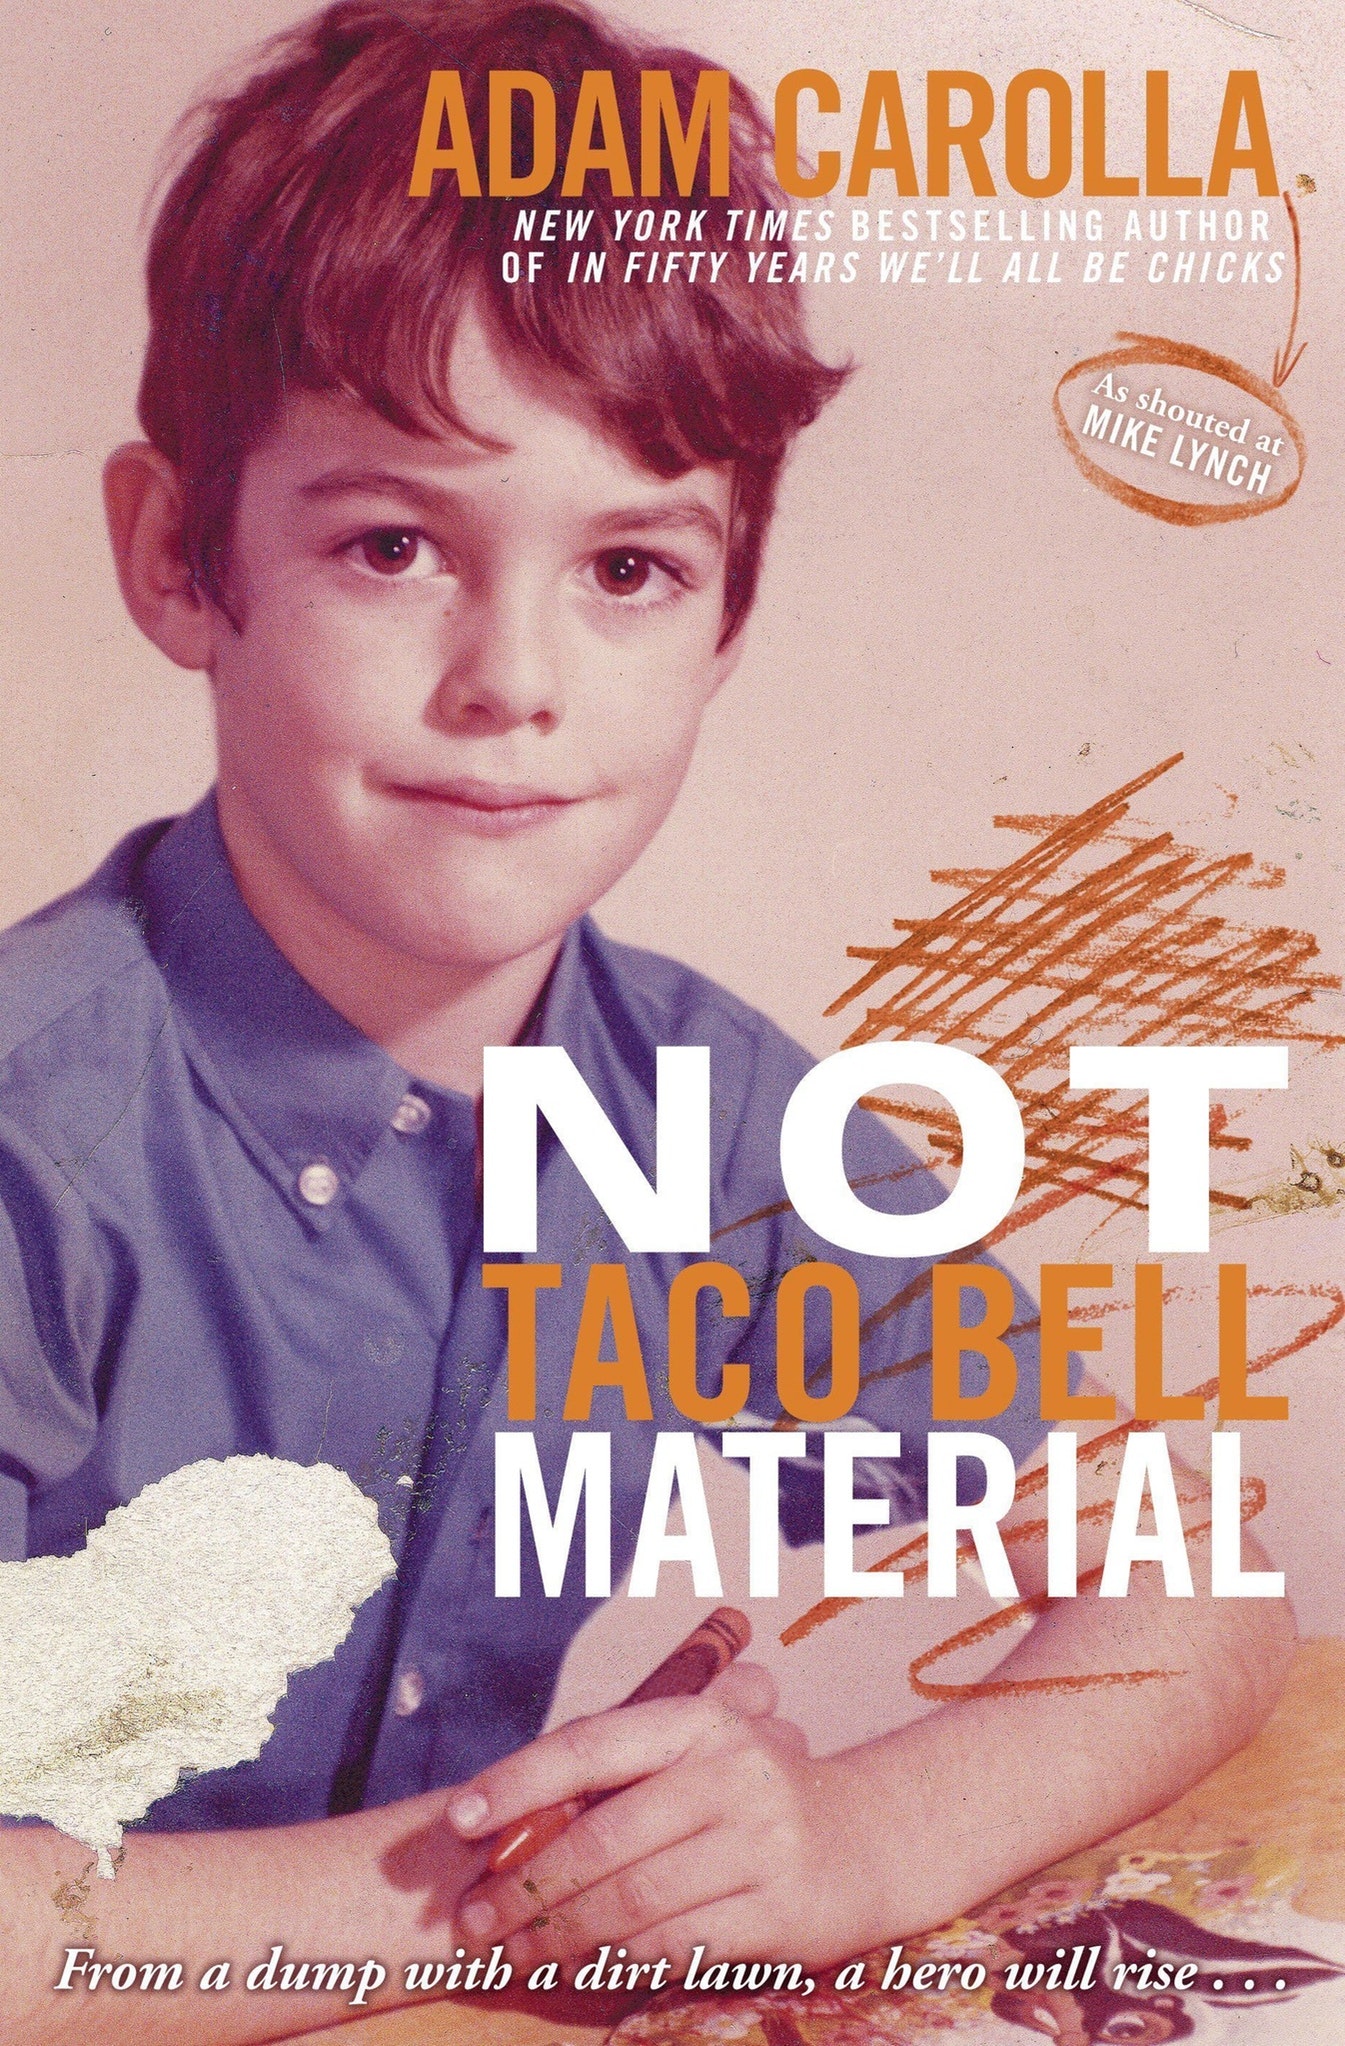 1. ‘Not Taco Bell Material’ by Adam Carolla